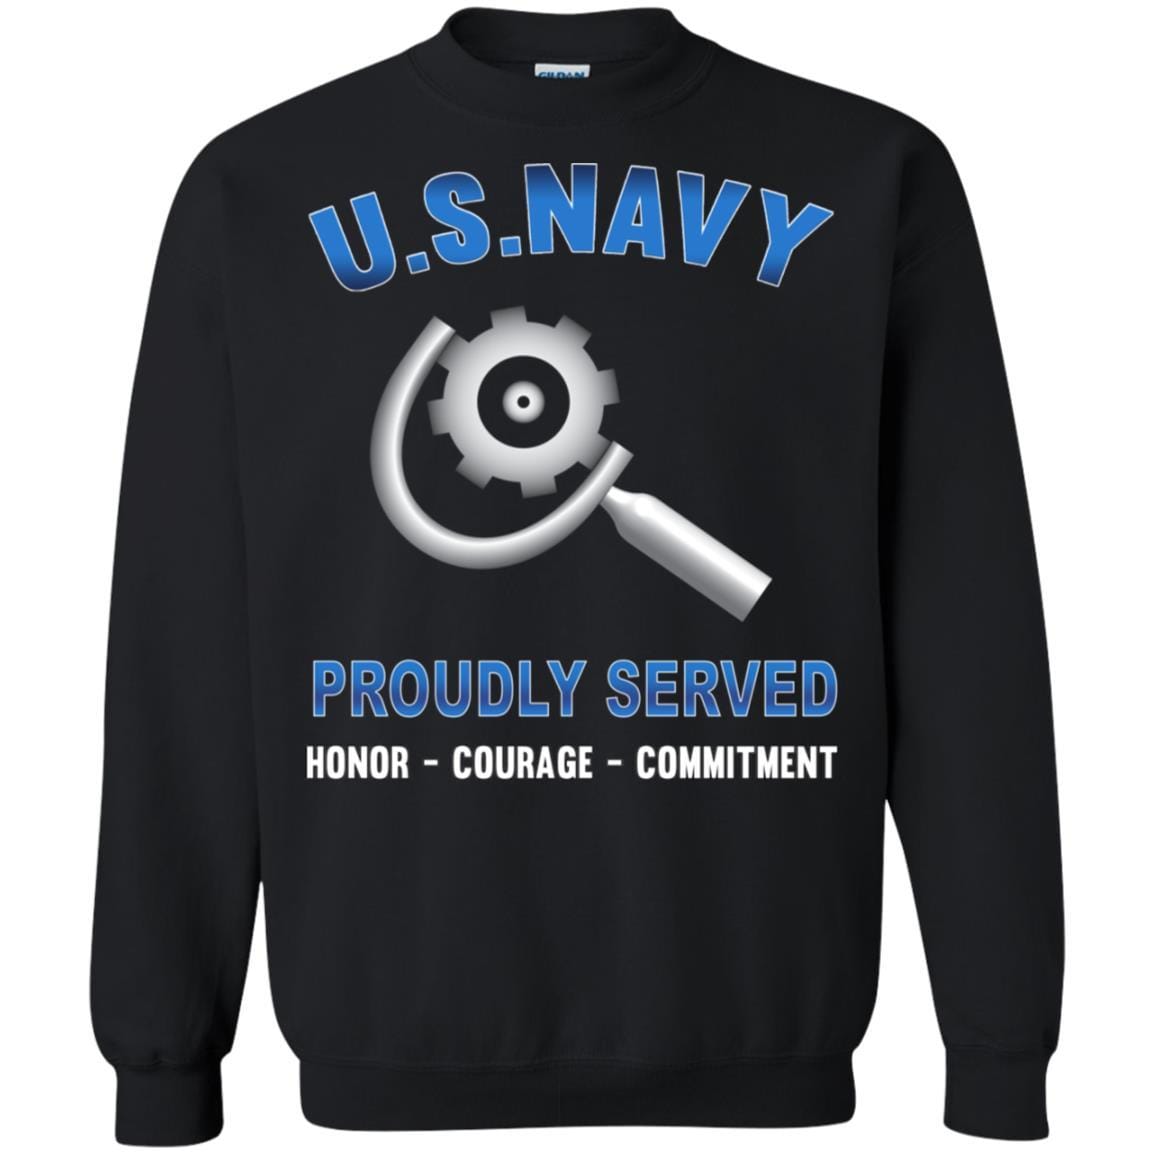 U.S Navy Machinery repairman Navy MR - Proudly Served T-Shirt For Men On Front-TShirt-Navy-Veterans Nation